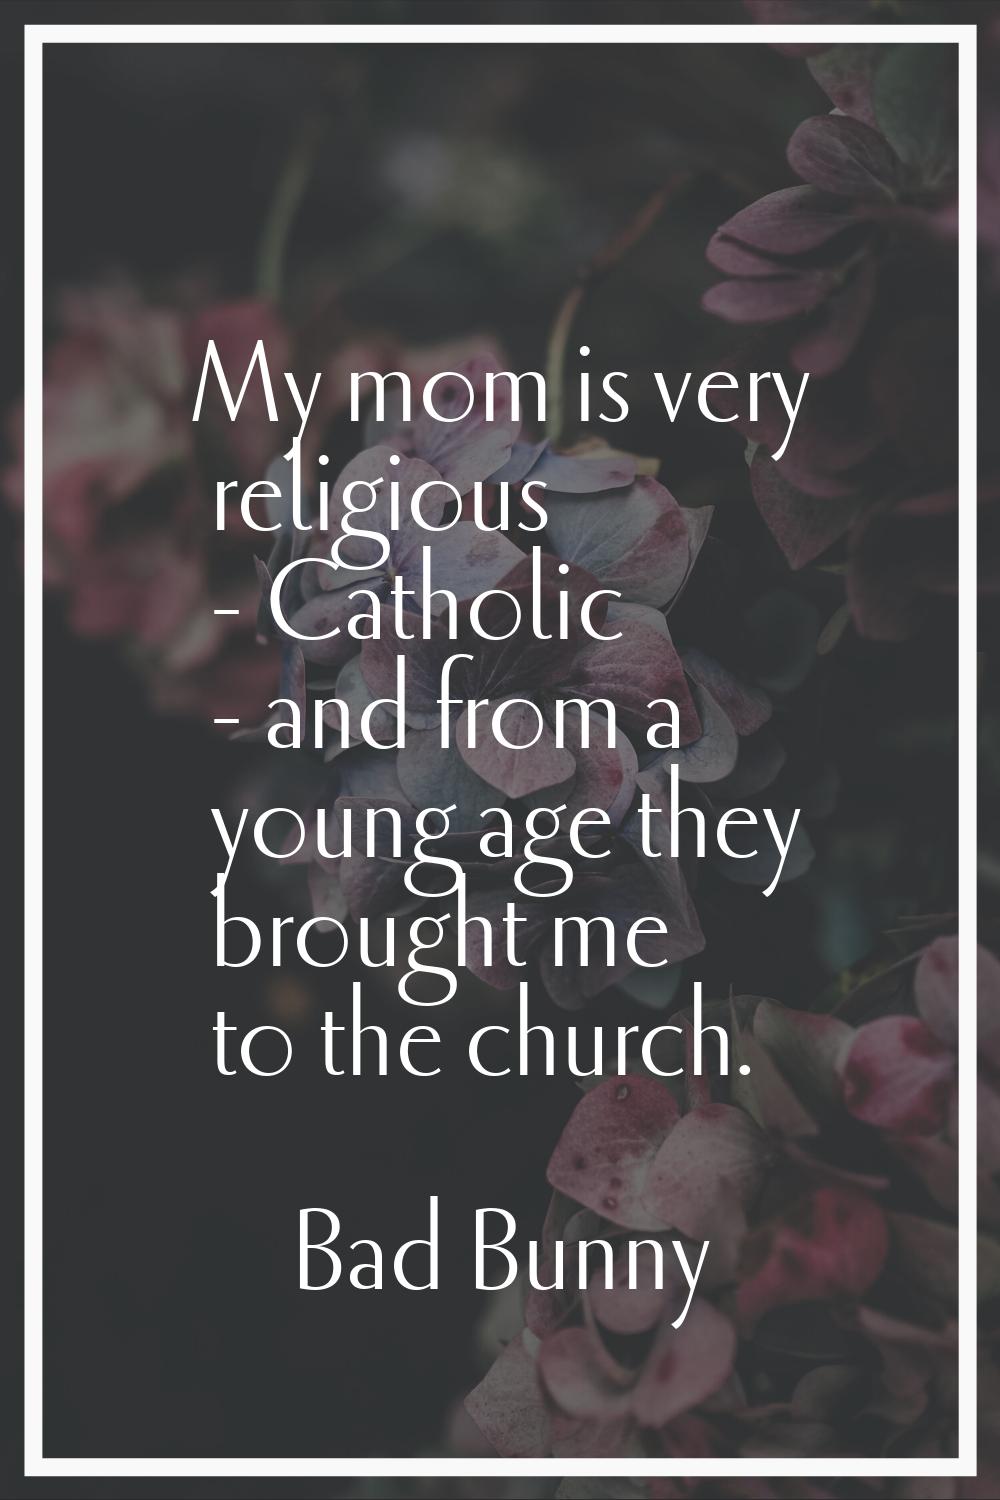 My mom is very religious - Catholic - and from a young age they brought me to the church.